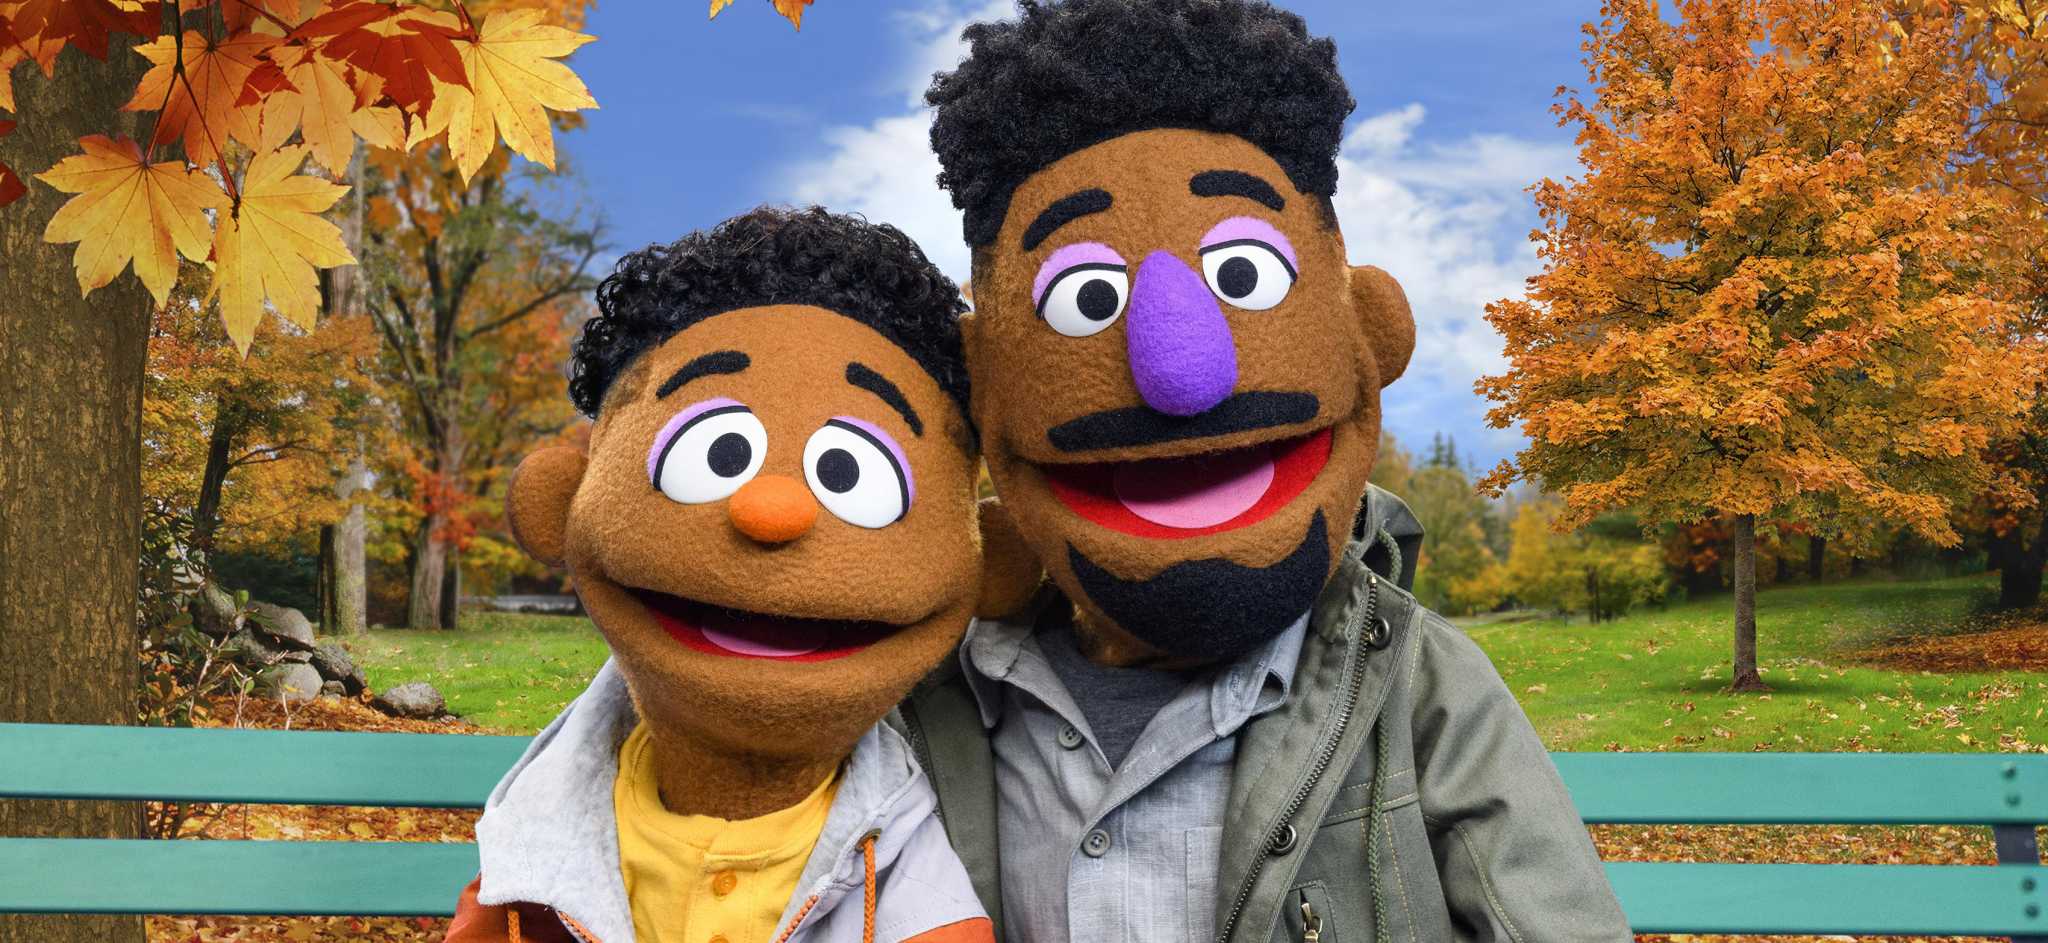 One of 'Sesame Street's' new Black Muppets brought to life by San